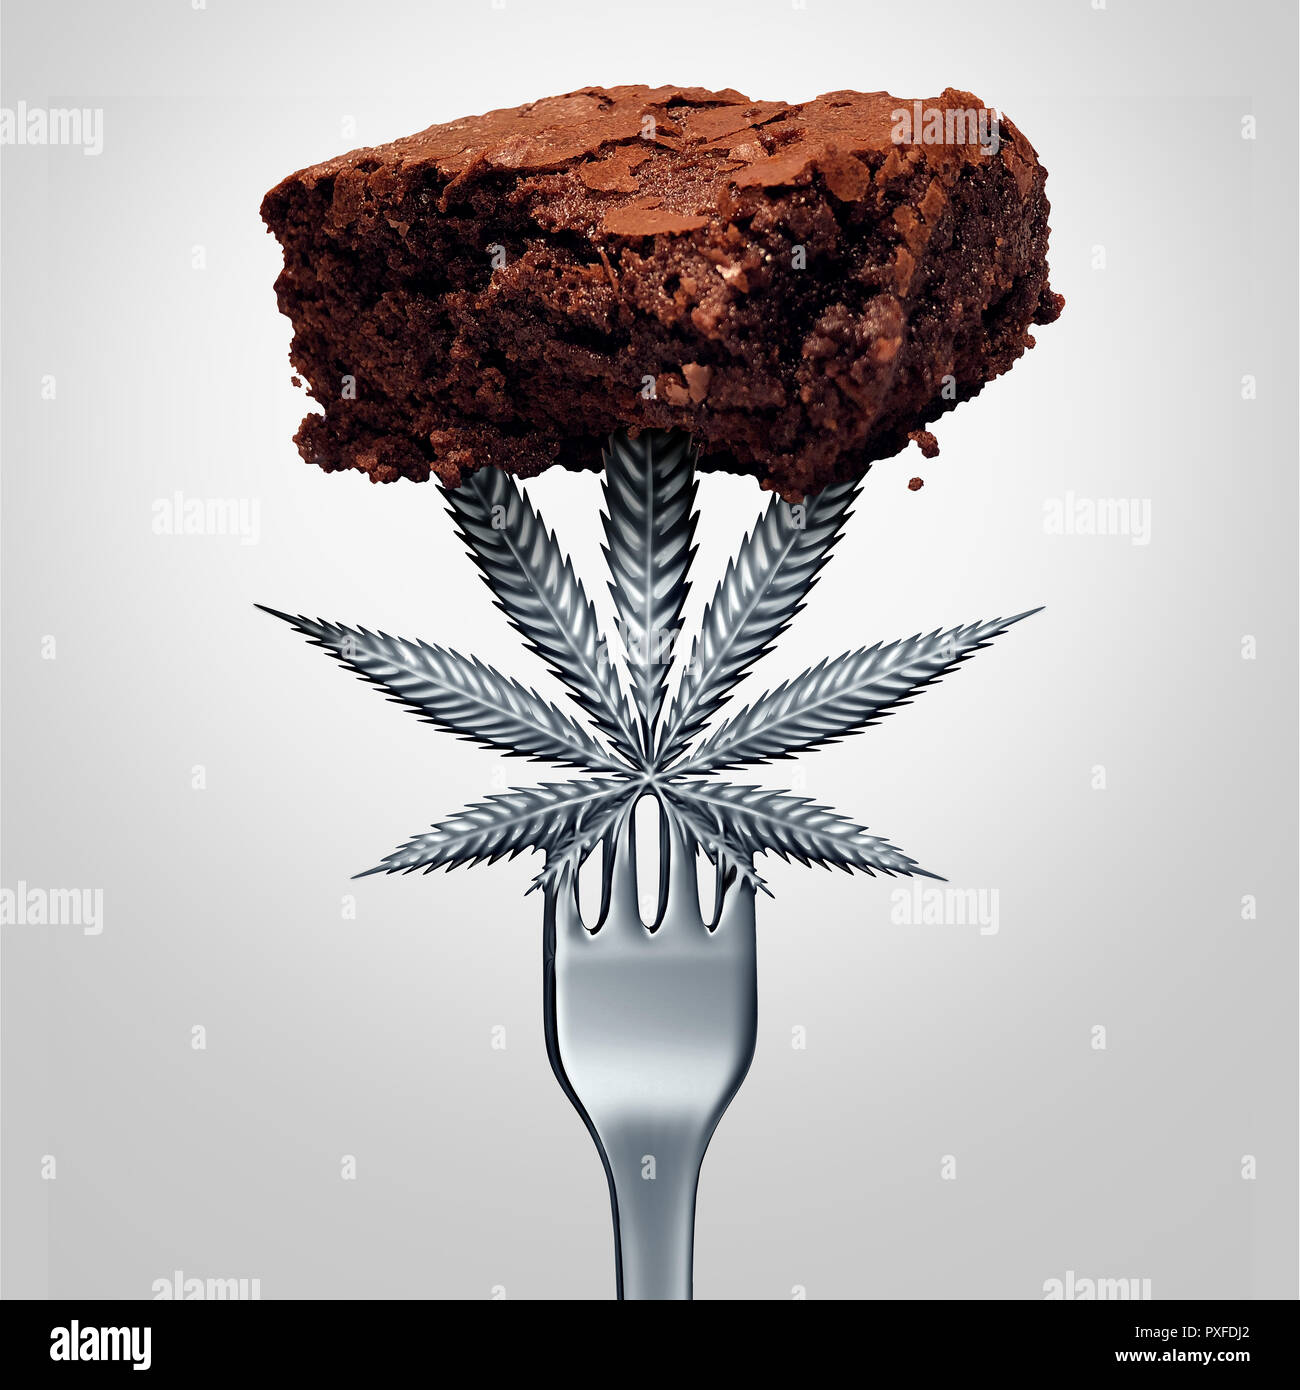 Cannabis brownie edible or marijuana edibles snack with a leaf representing pot baked good herbal food infused with psychoactive medicinal. Stock Photo